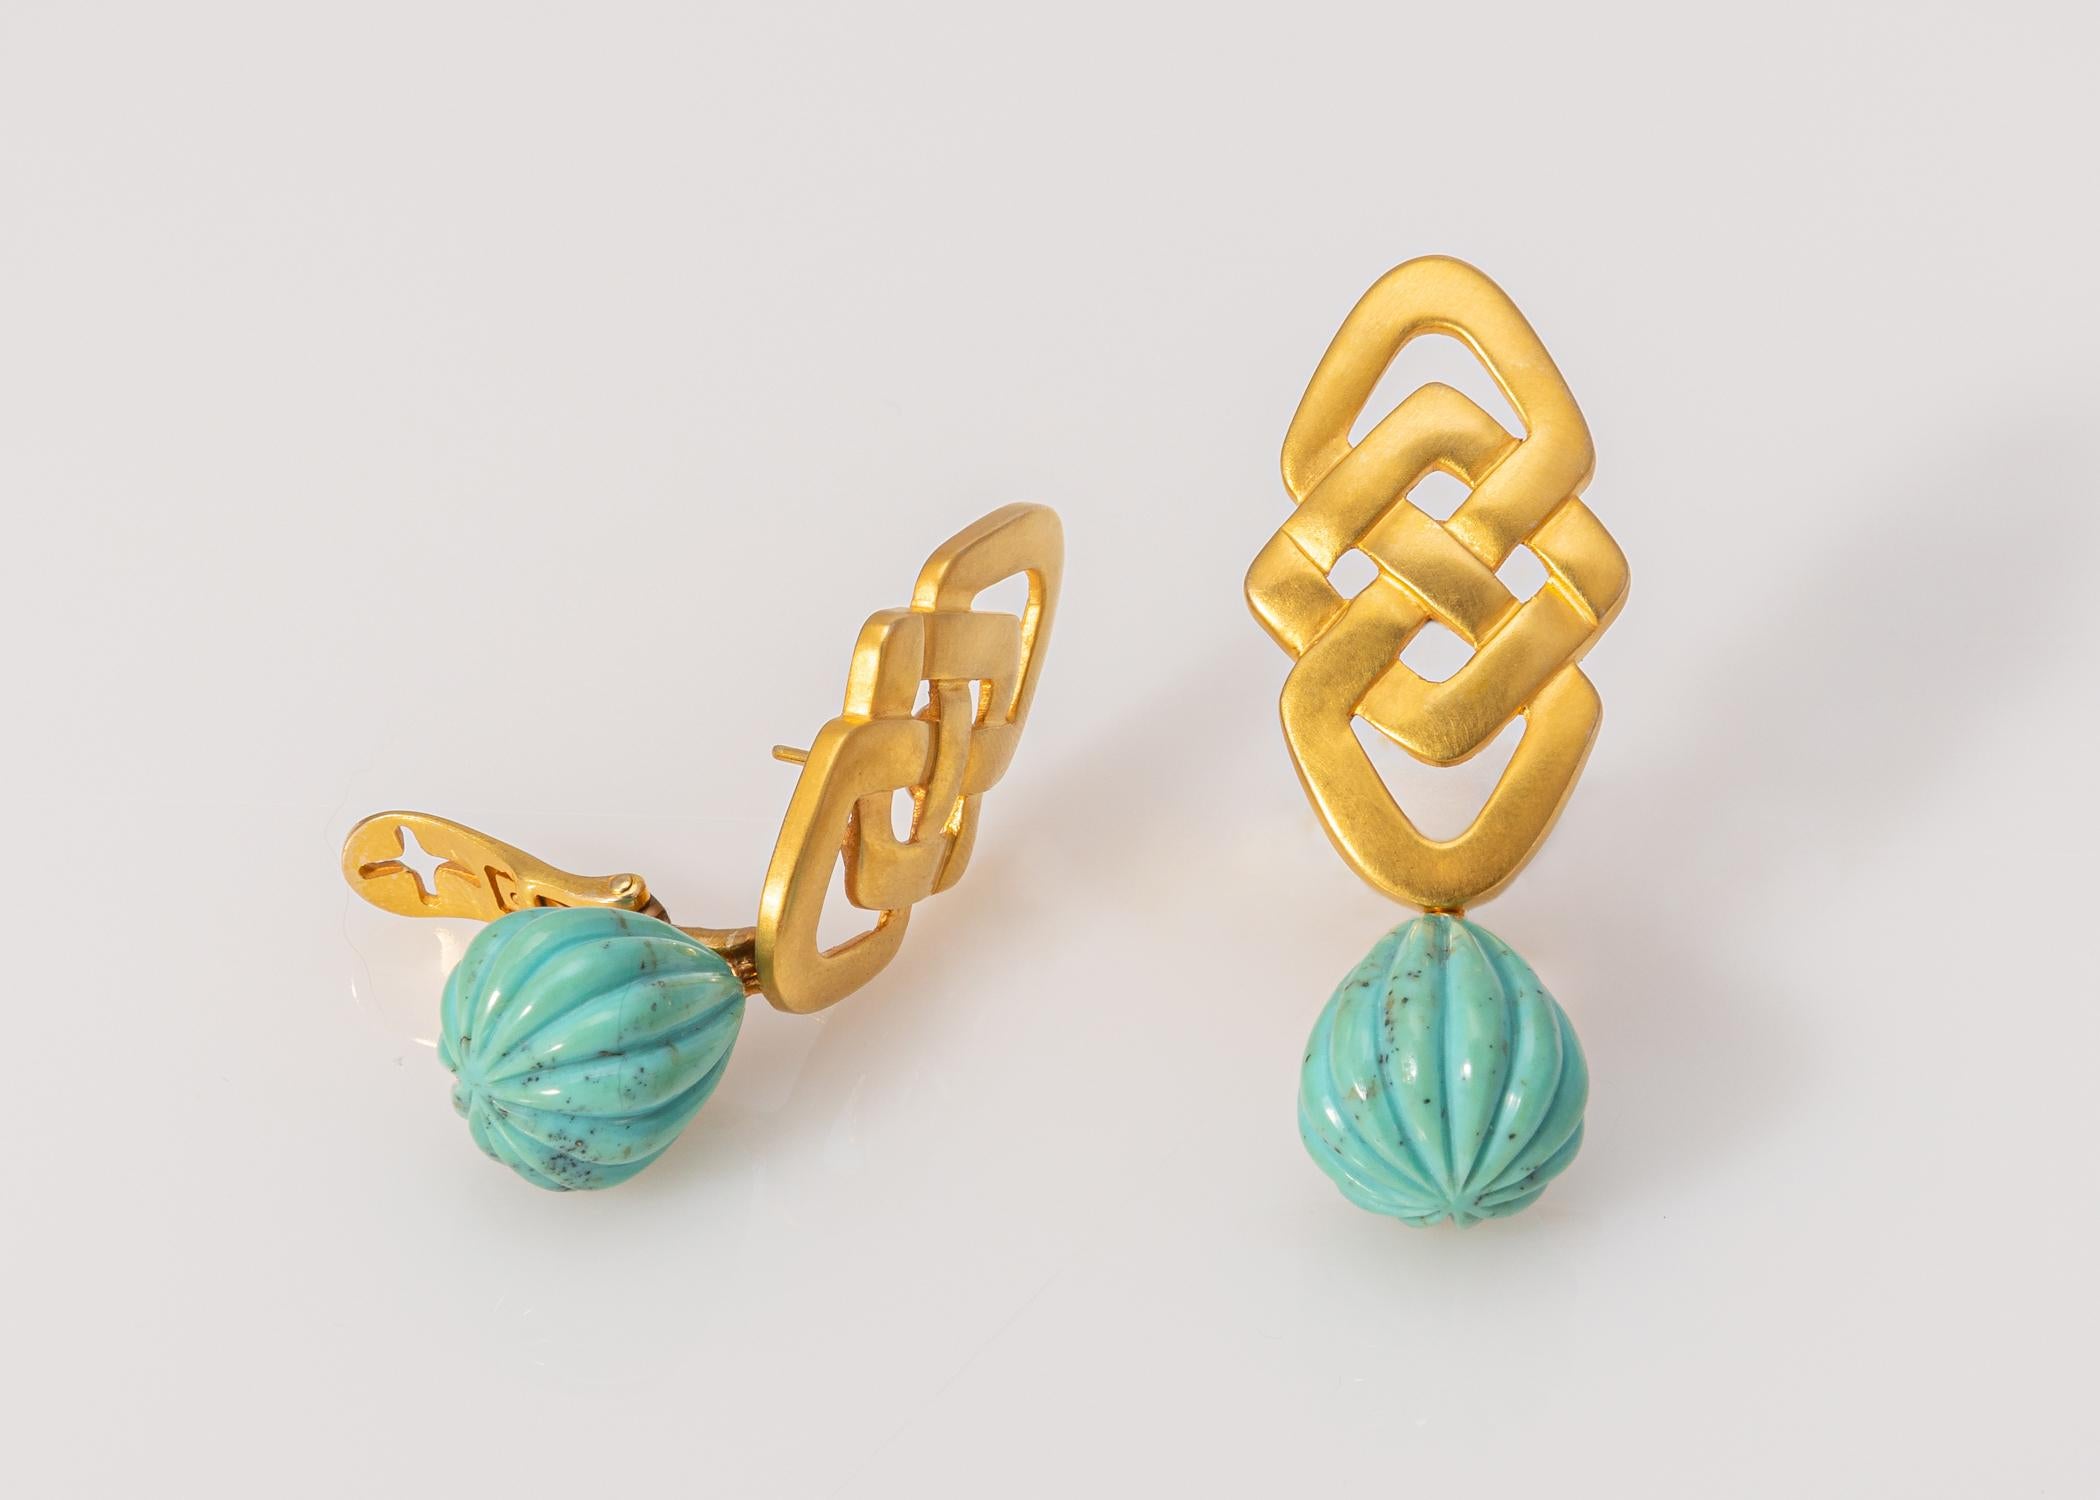 The knot motif is often seen in Lalaounis designs. This design features a pair of carved turquoise drops. If your not traveling to Greece bring it to you with this elegant pair of drop earrings. 2 inches in length.